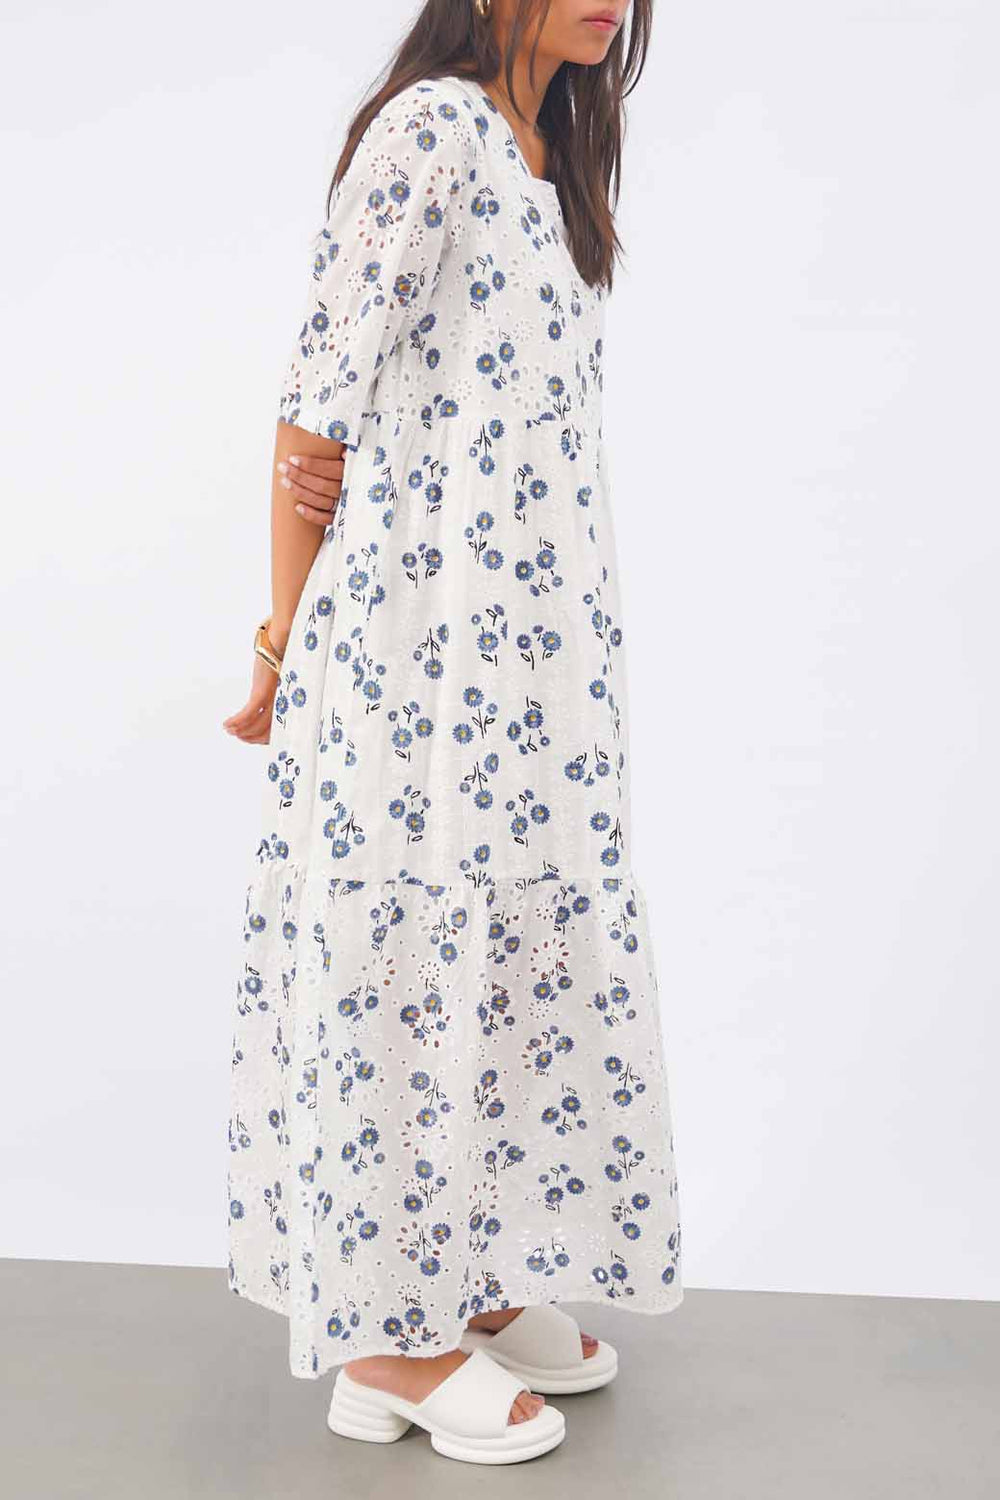 WHITE BREEZY EMBROIDERED DRESS